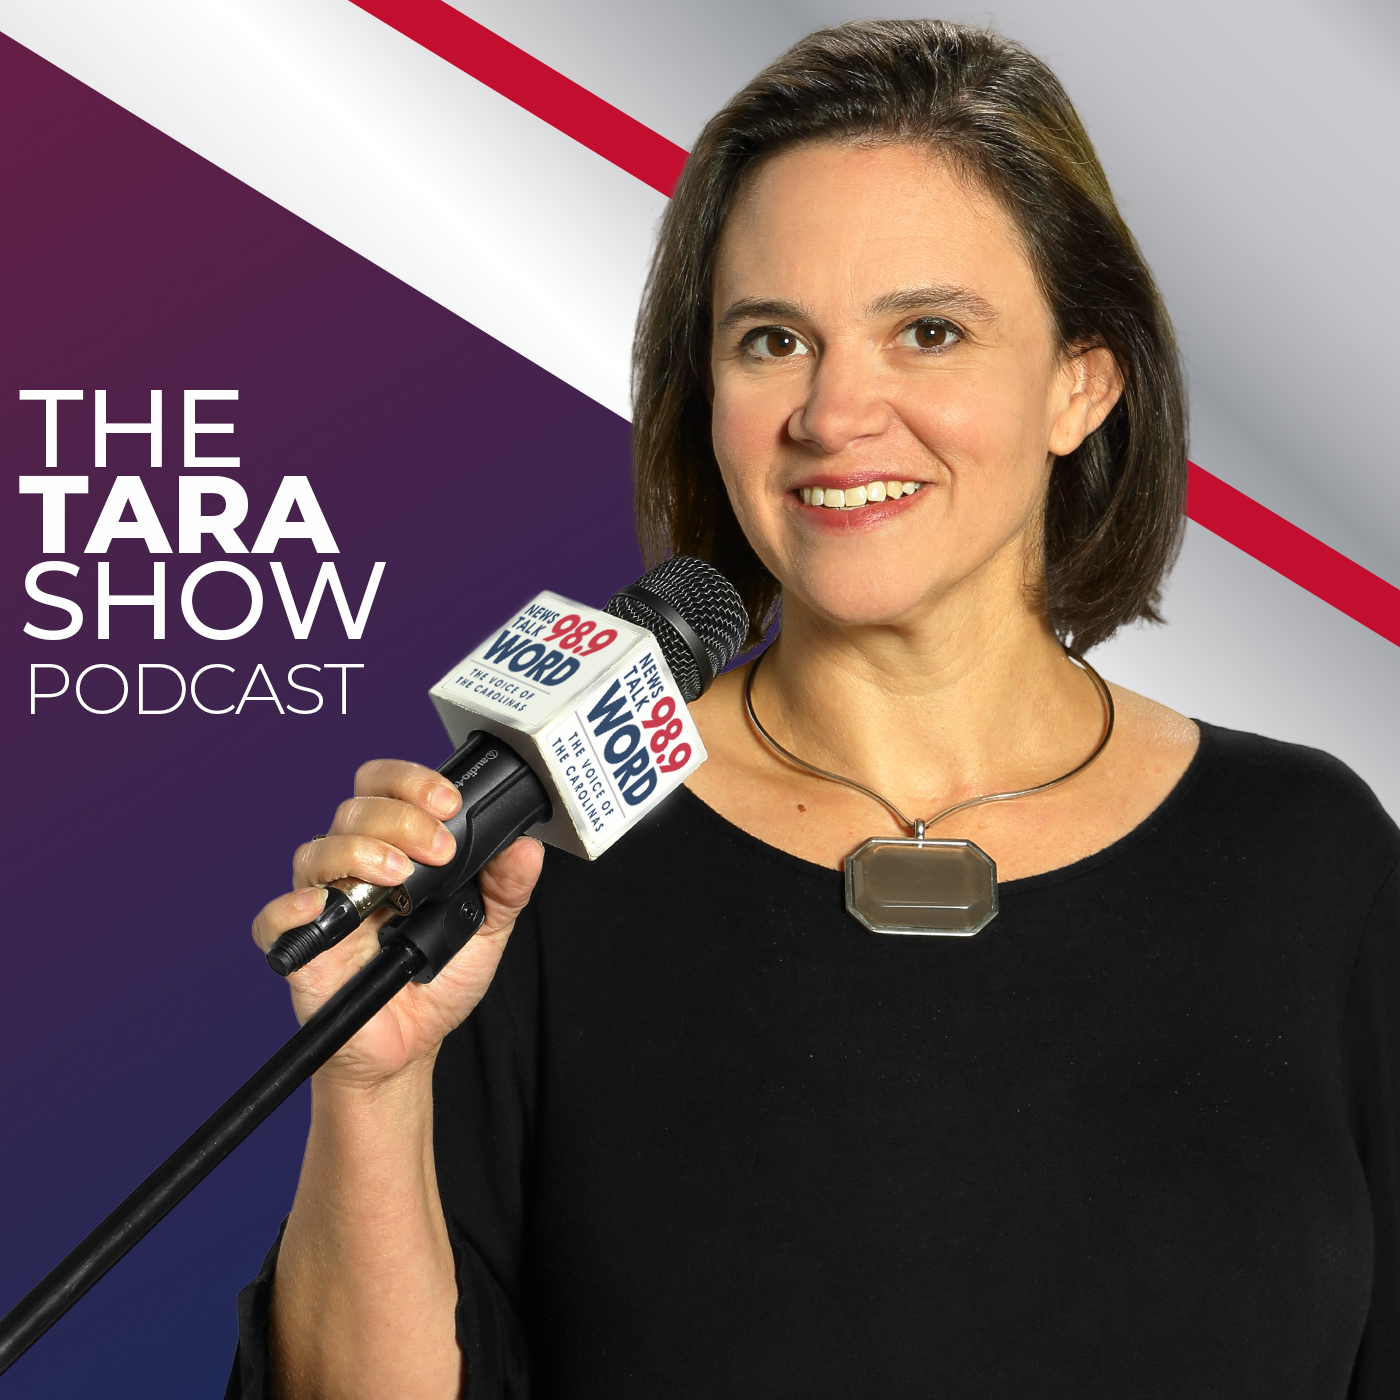 Hour 2: The Tara Show  - “The Border Problem No Longer a Far Off Issue” “The Biggs Bloomberg Debate” “Reason for Sherri Biggs with Special Guest Matt Boyle” “Free Sex Change Operations for Minors” 